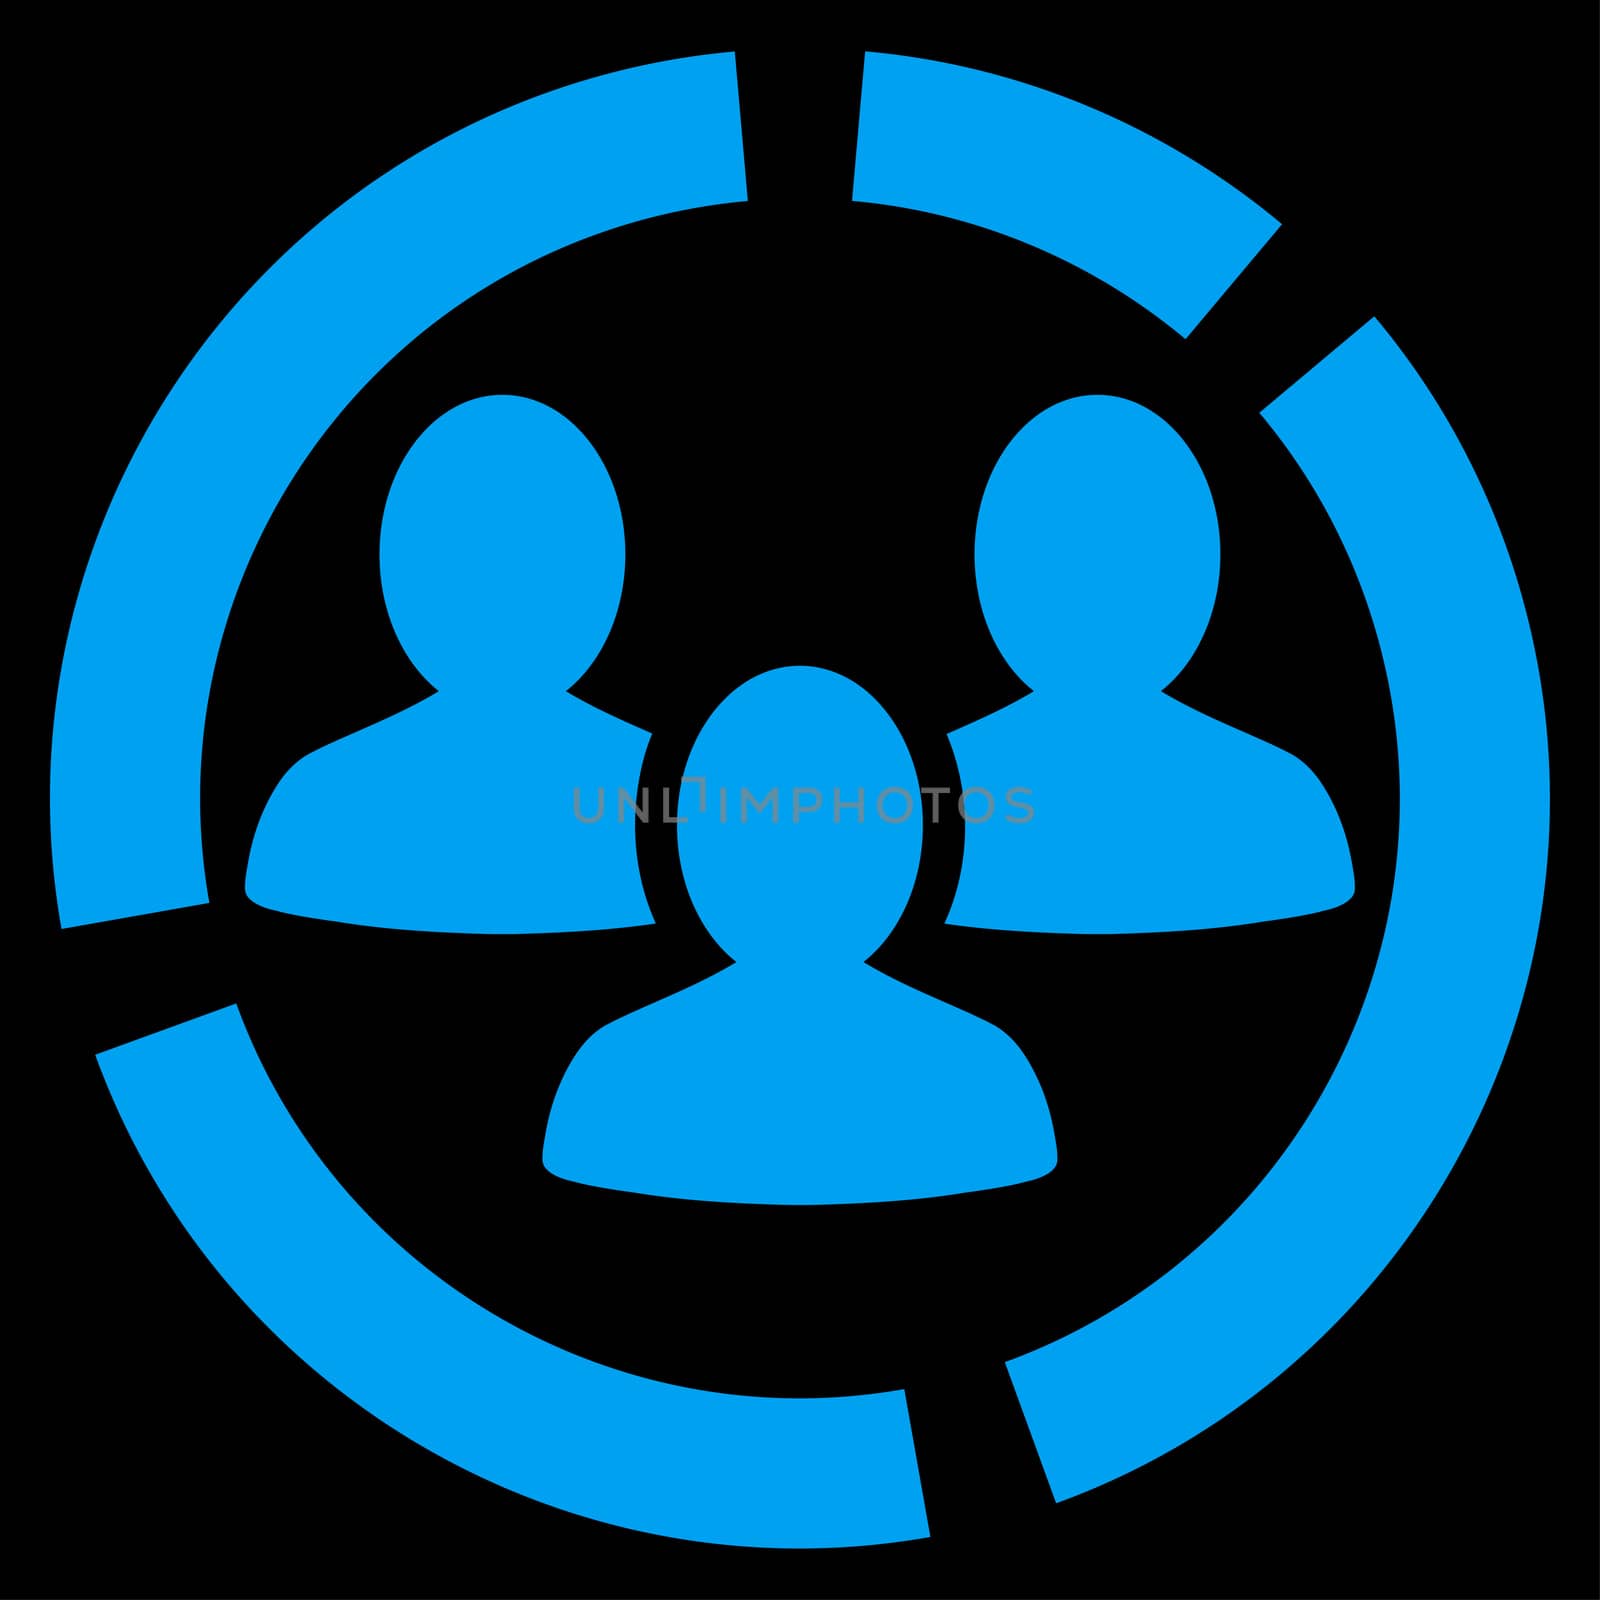 Demography diagram icon by ahasoft